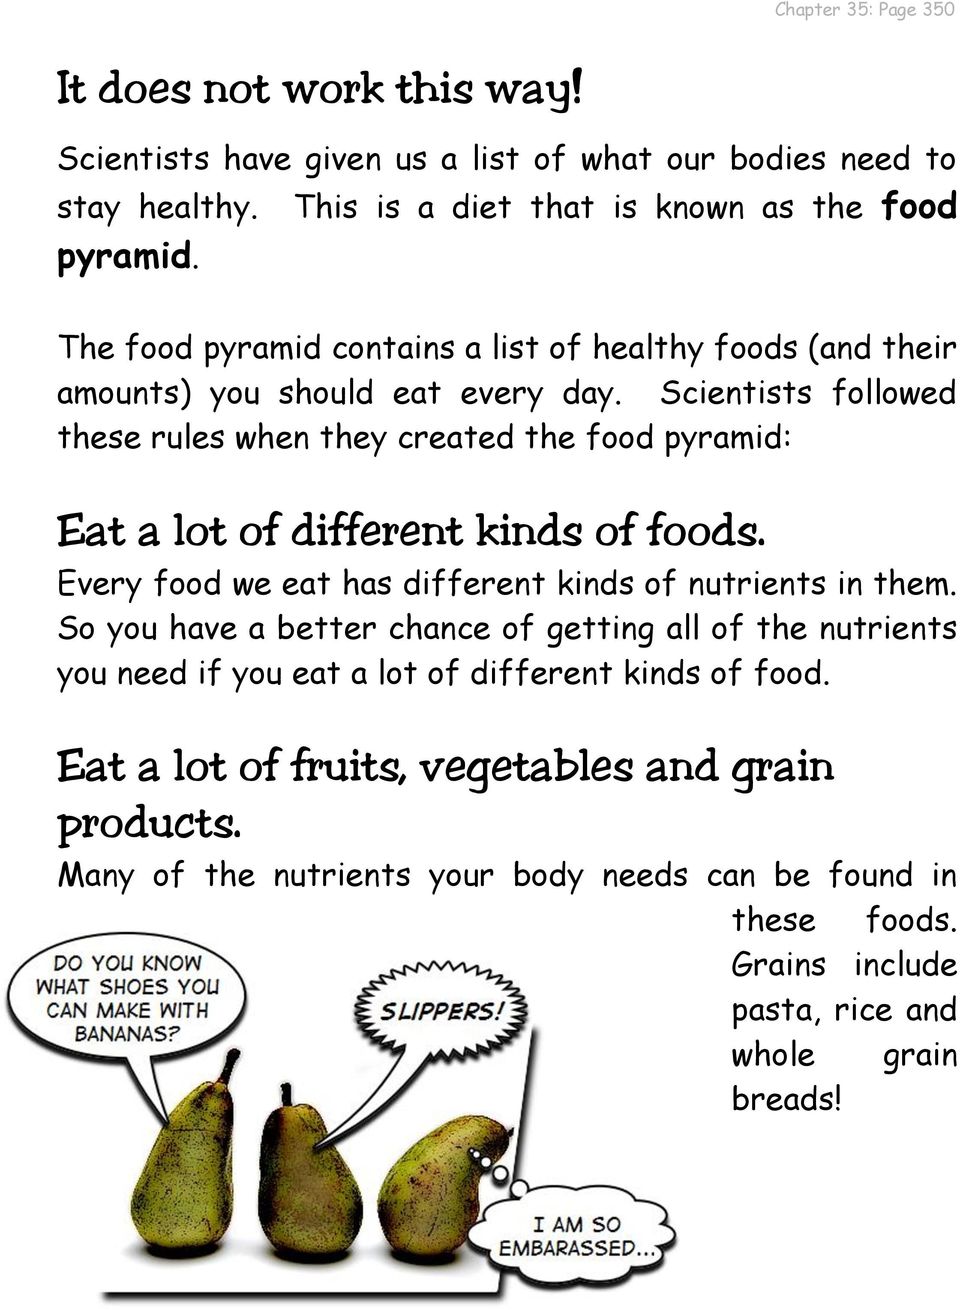 Scientists followed these rules when they created the food pyramid: Eat a lot of different kinds of foods. Every food we eat has different kinds of nutrients in them.